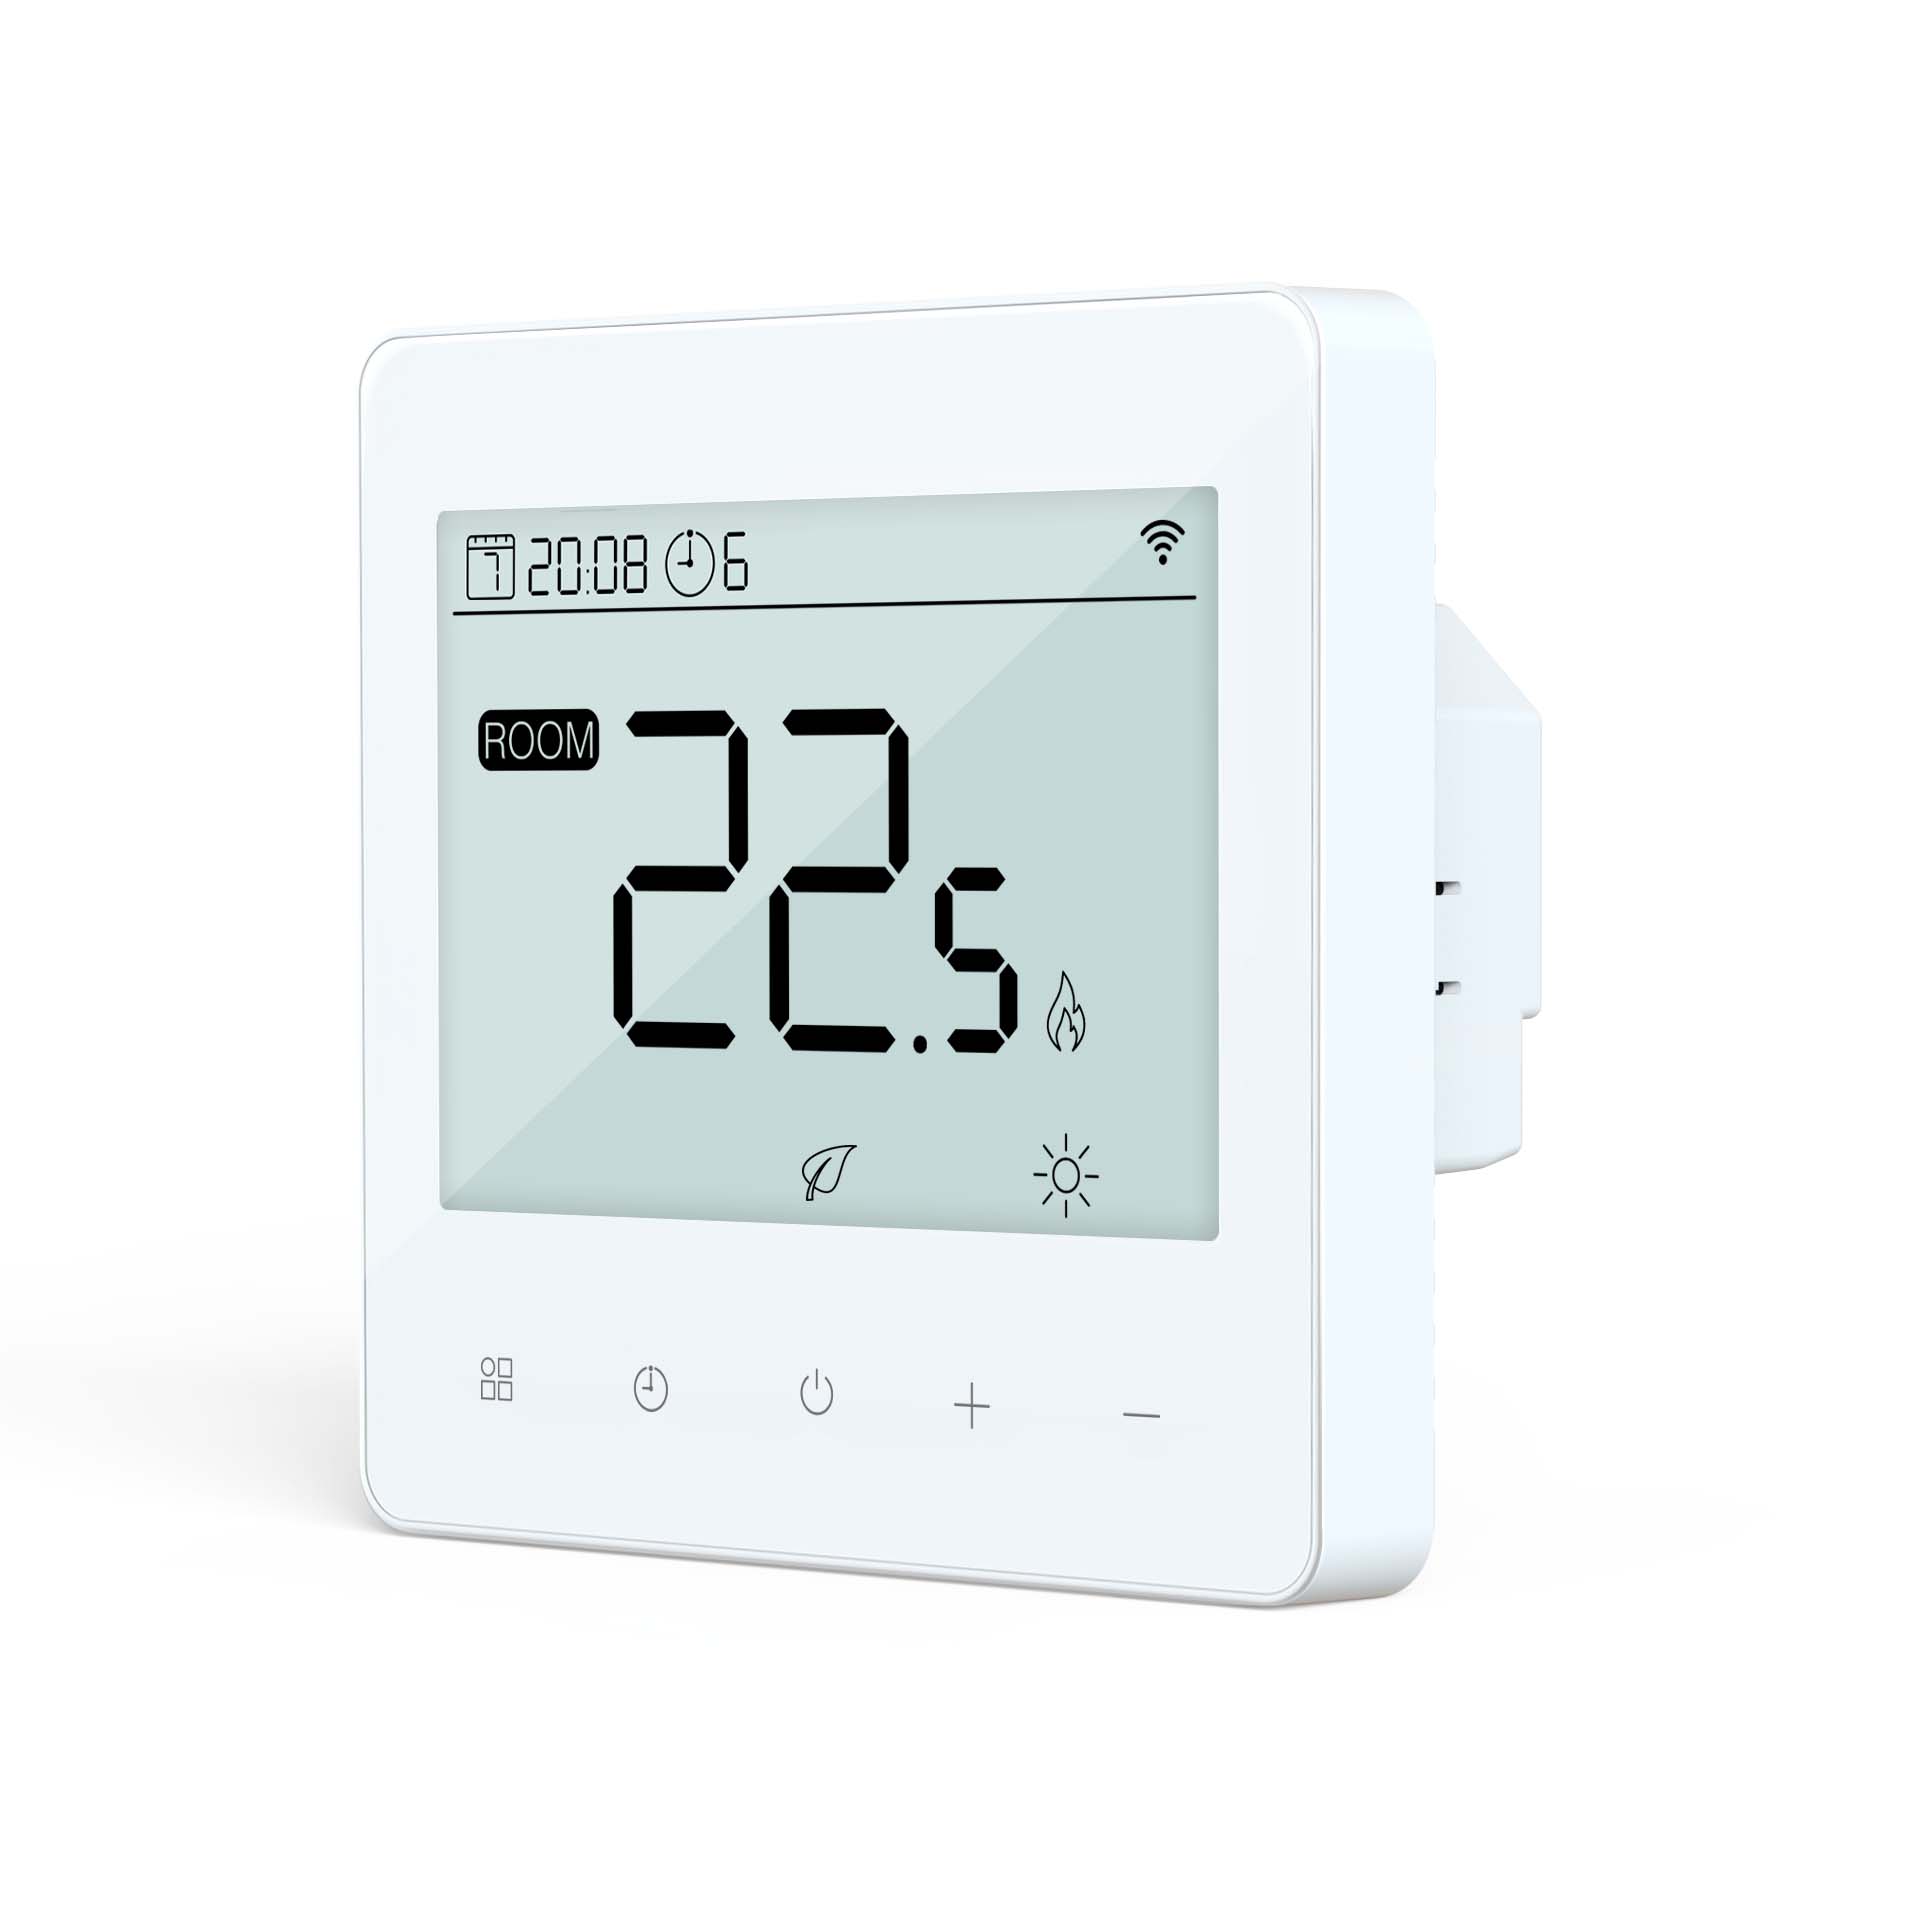 Multi-zone wired wiring box & room thermostats at underfloor heating system